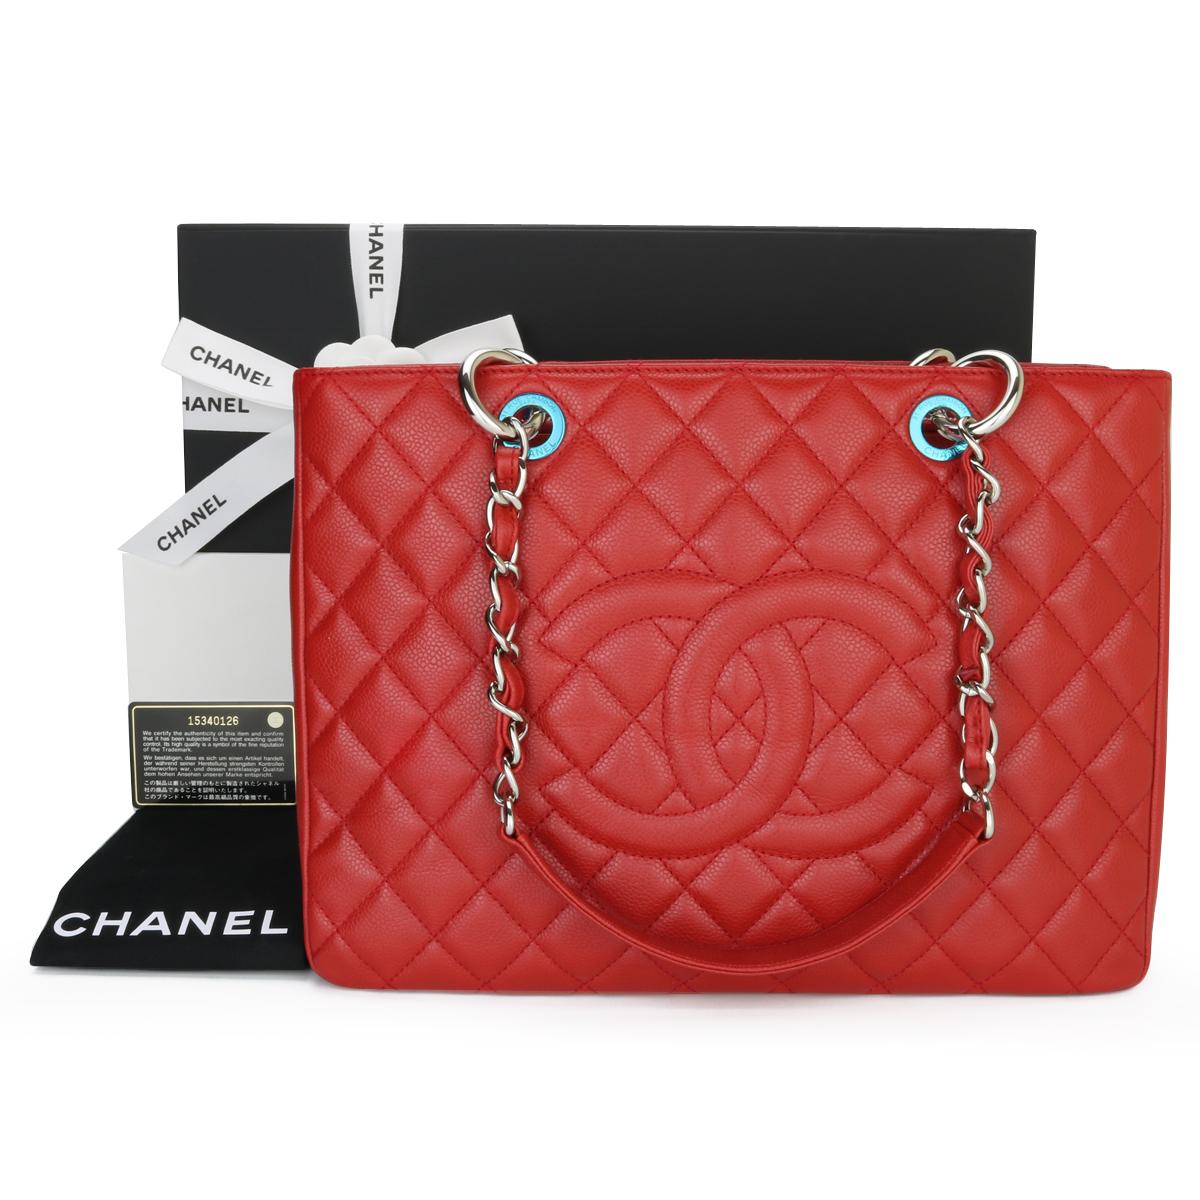 CHANEL Grand Shopping Tote (GST) Red Caviar with Silver Hardware 2011.

This bag is in excellent condition, the bag still holds its original shape, and the hardware is still very shiny.
As Chanel has discontinued the Grand Shopping Tote (GST), it is